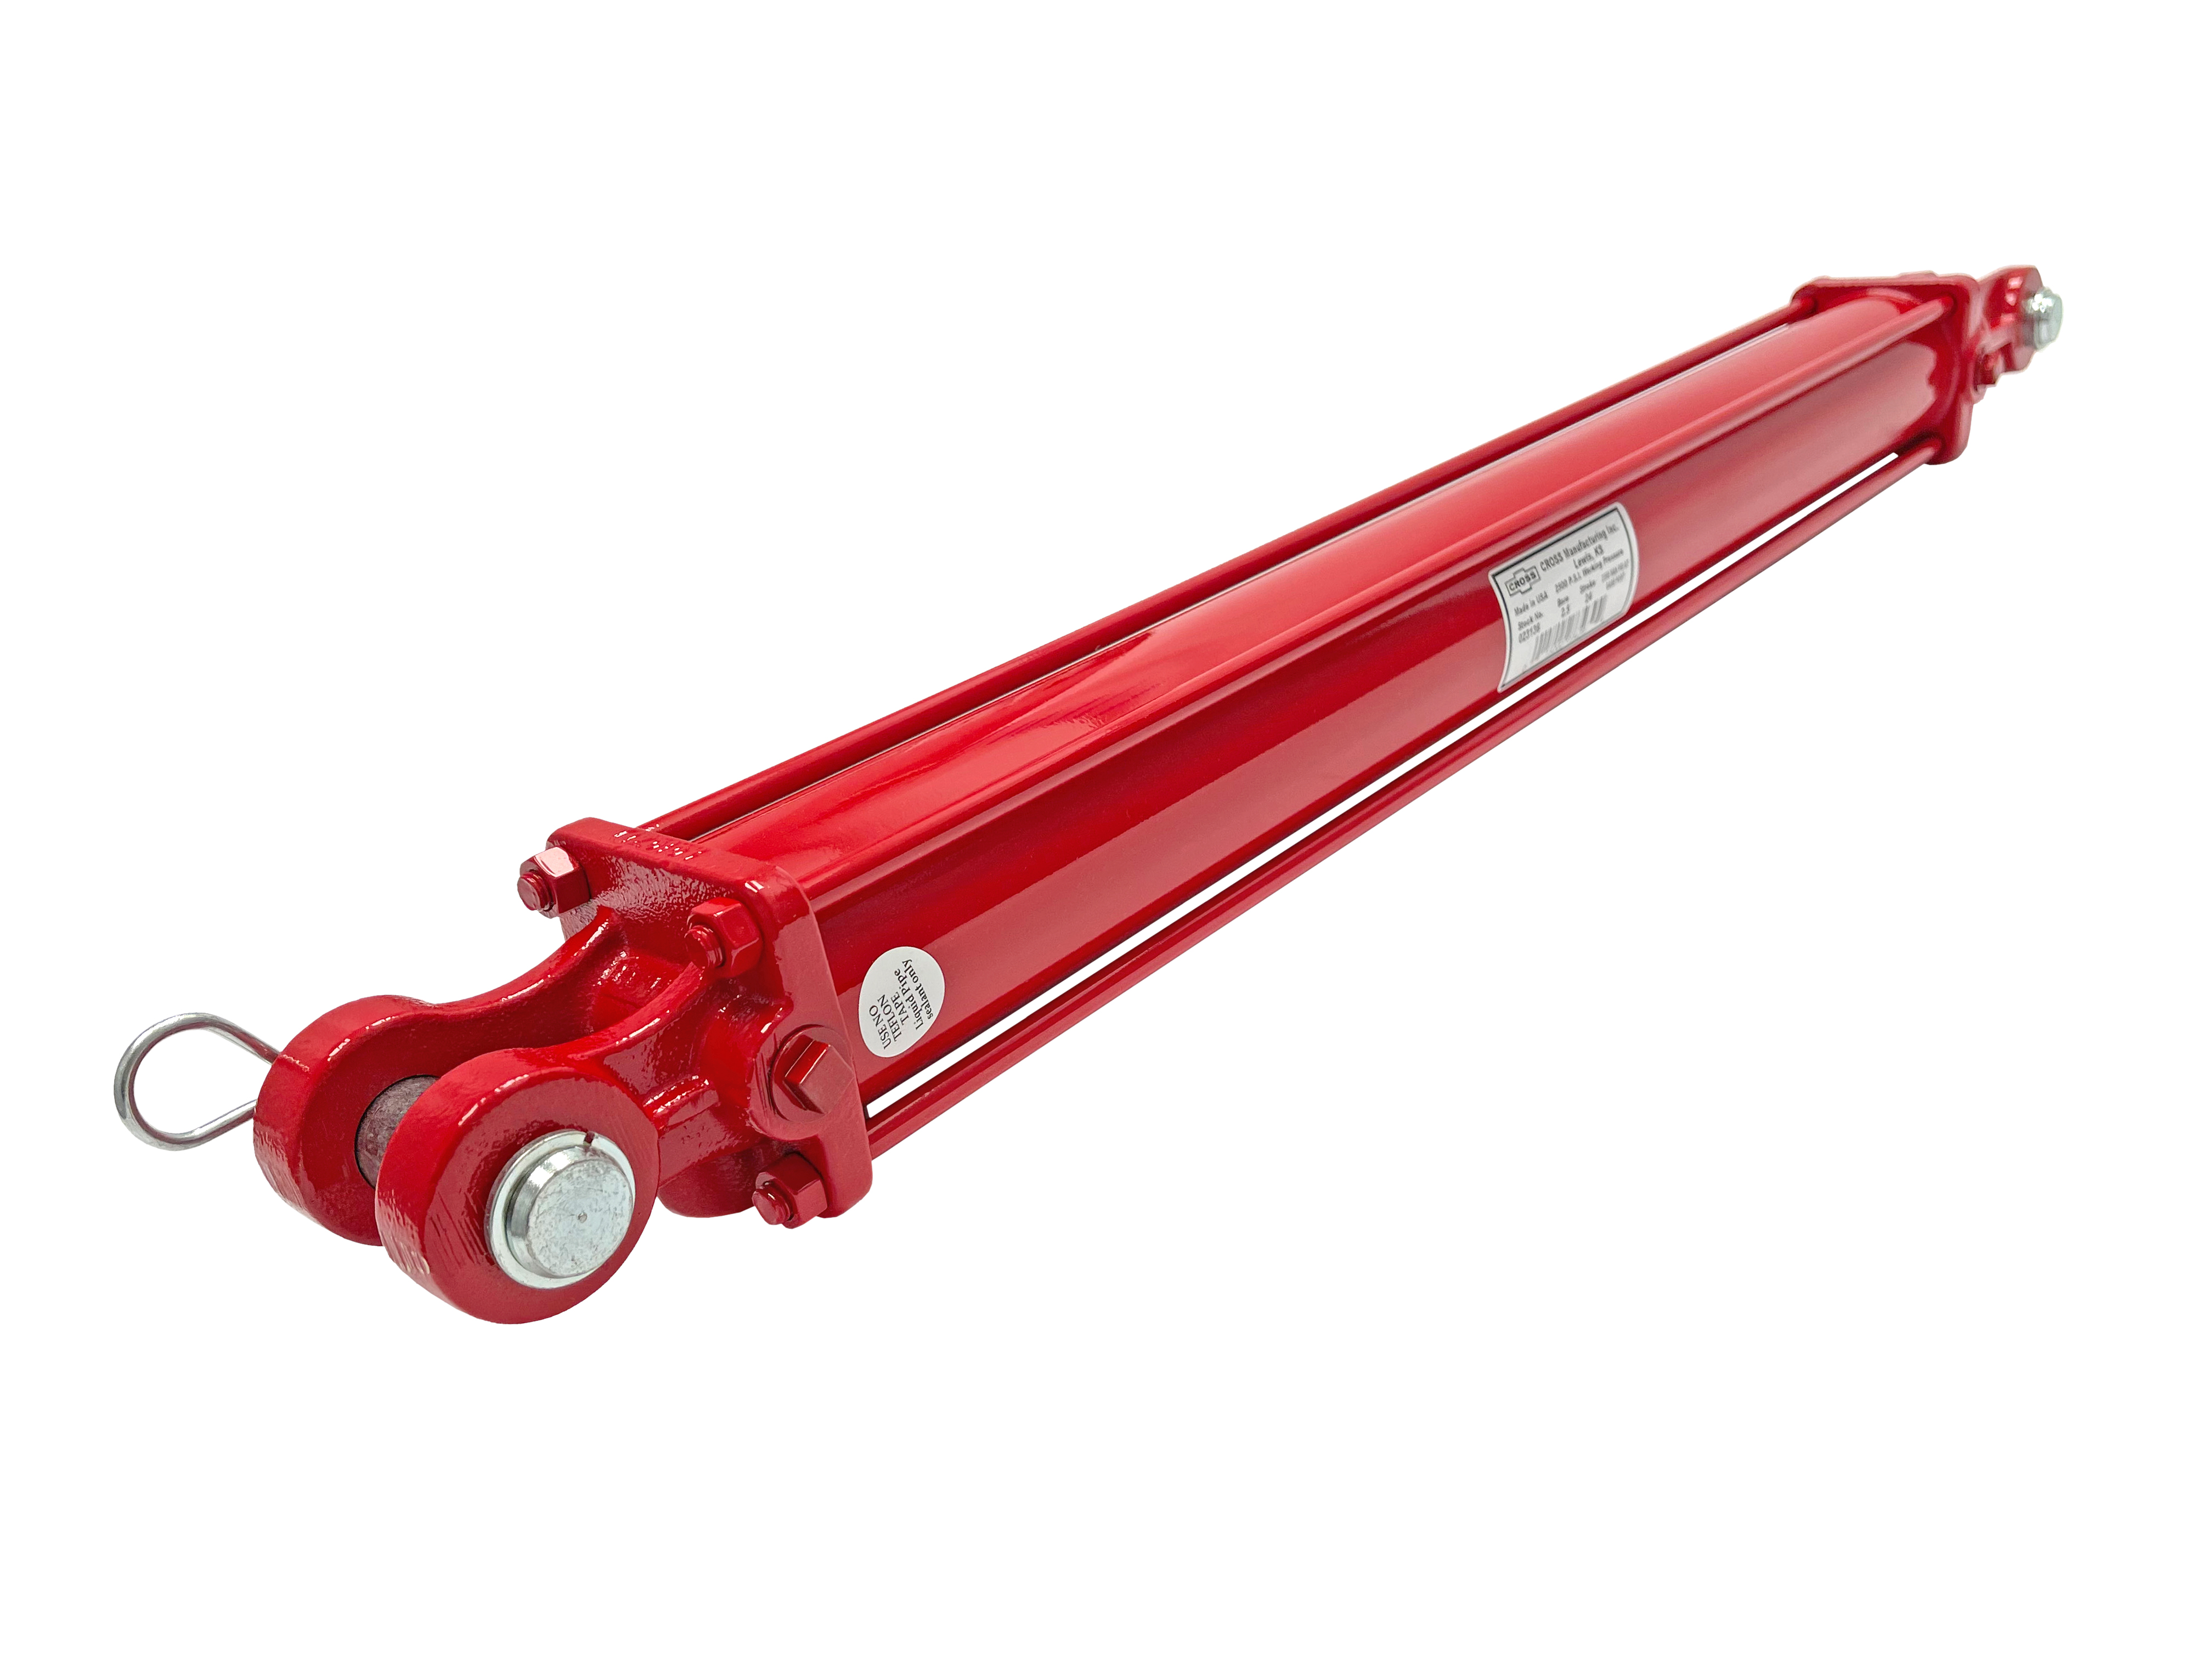 3 bore x 42 stroke CROSS hydraulic cylinder, tie rod double acting cylinder DB series | CROSS MANUFACTURING